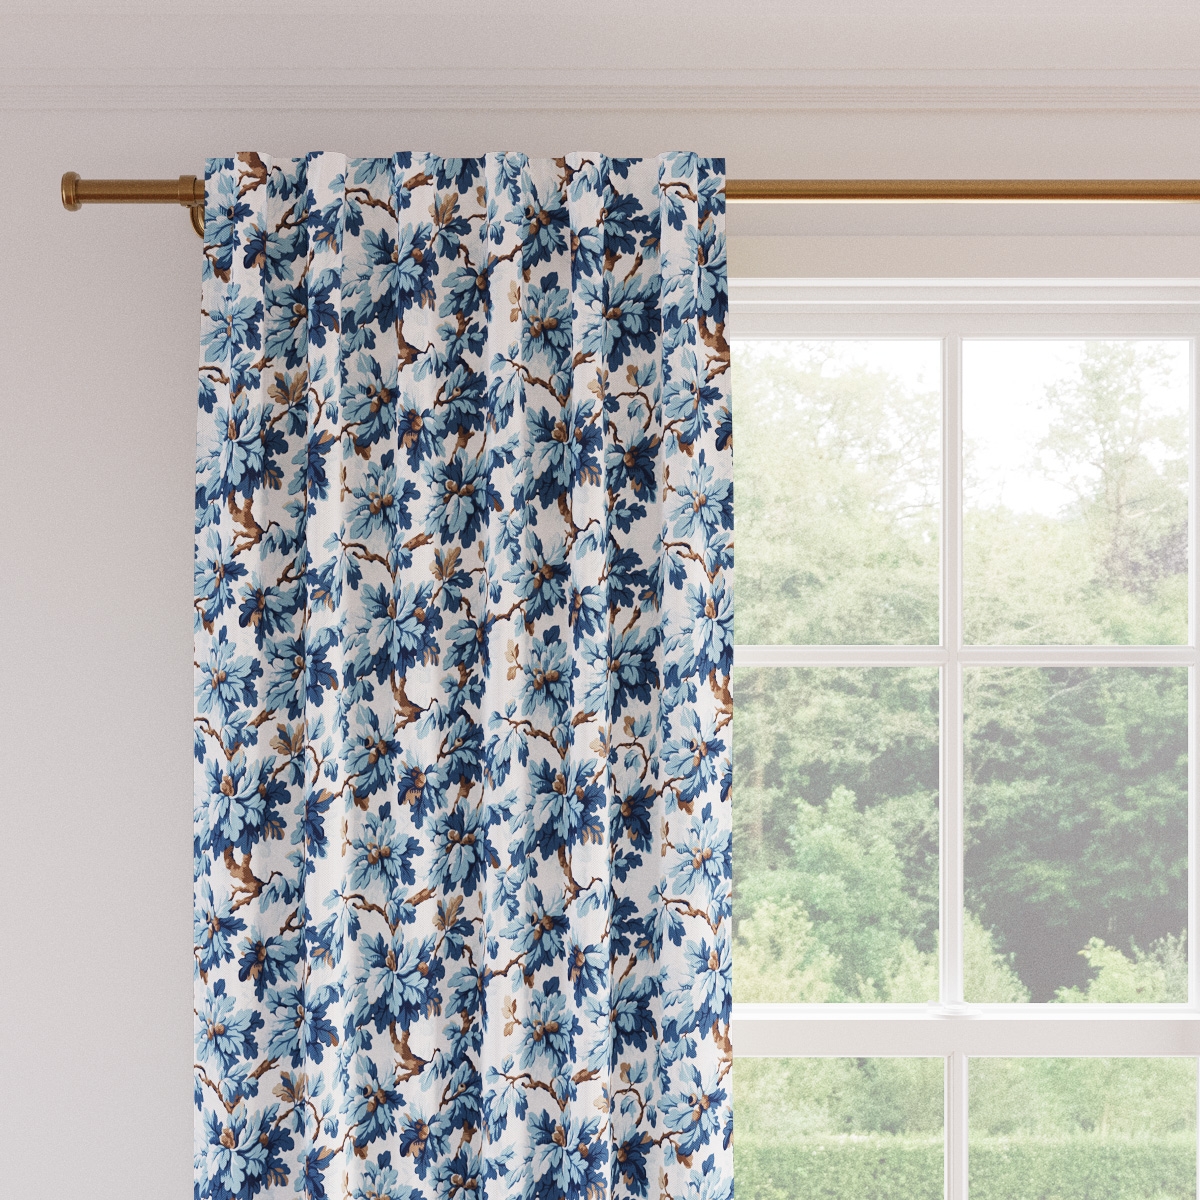 Printed Linen Curtain, Delft Woodland, 50" x 96", Privacy - Image 1